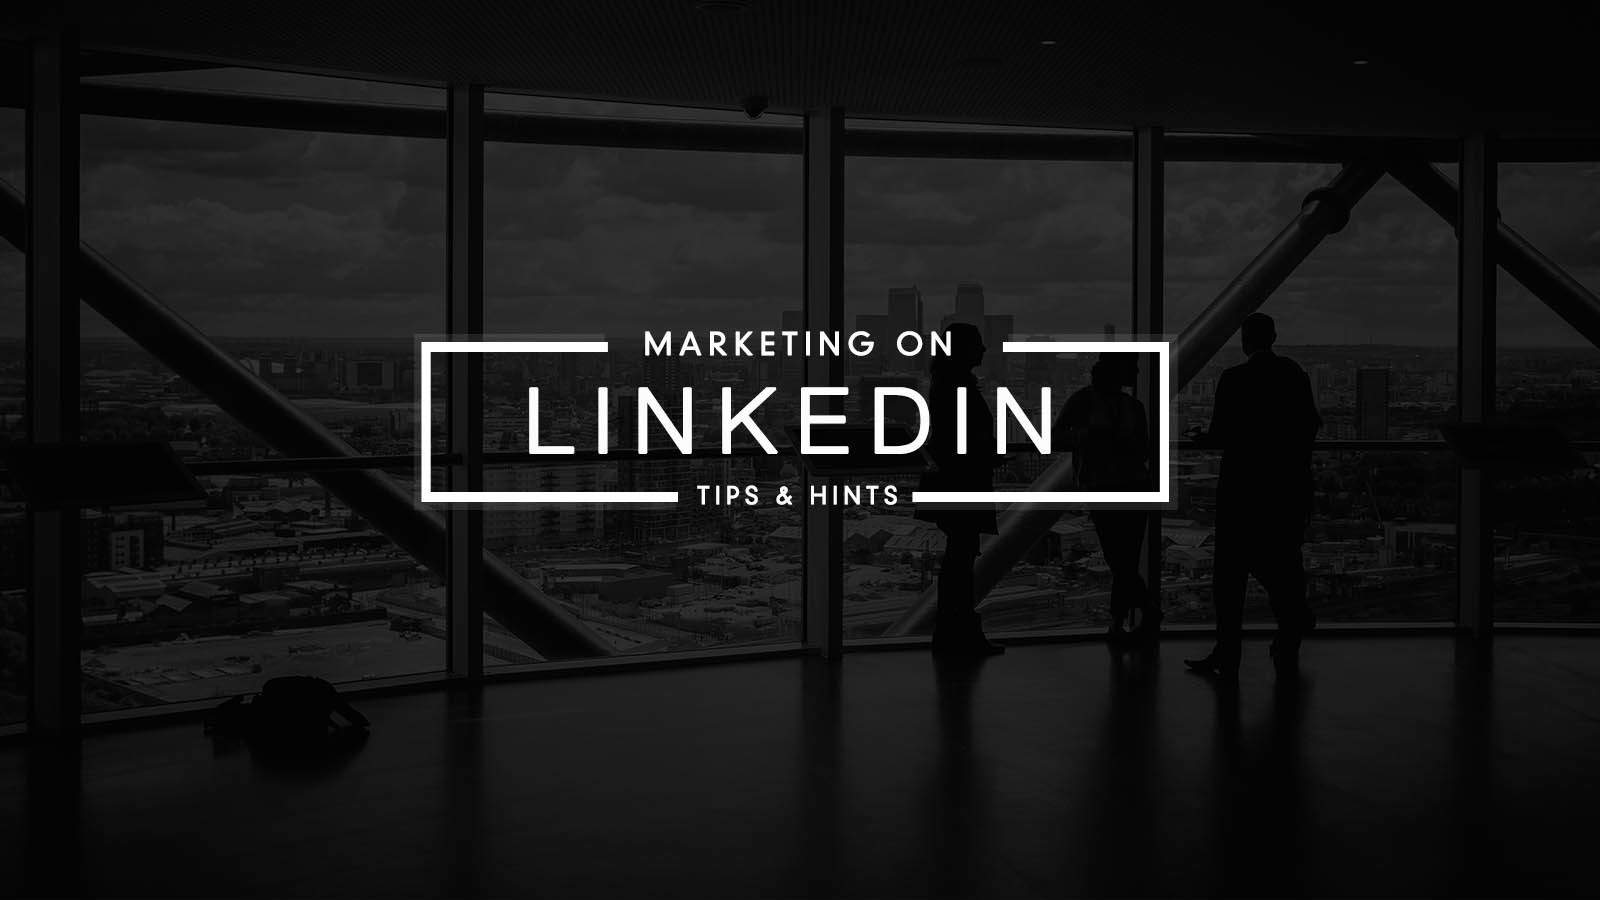 4 Simple Things You Can Do Today To Improve Your Linkedin - Linkedin Marketing - HD Wallpaper 